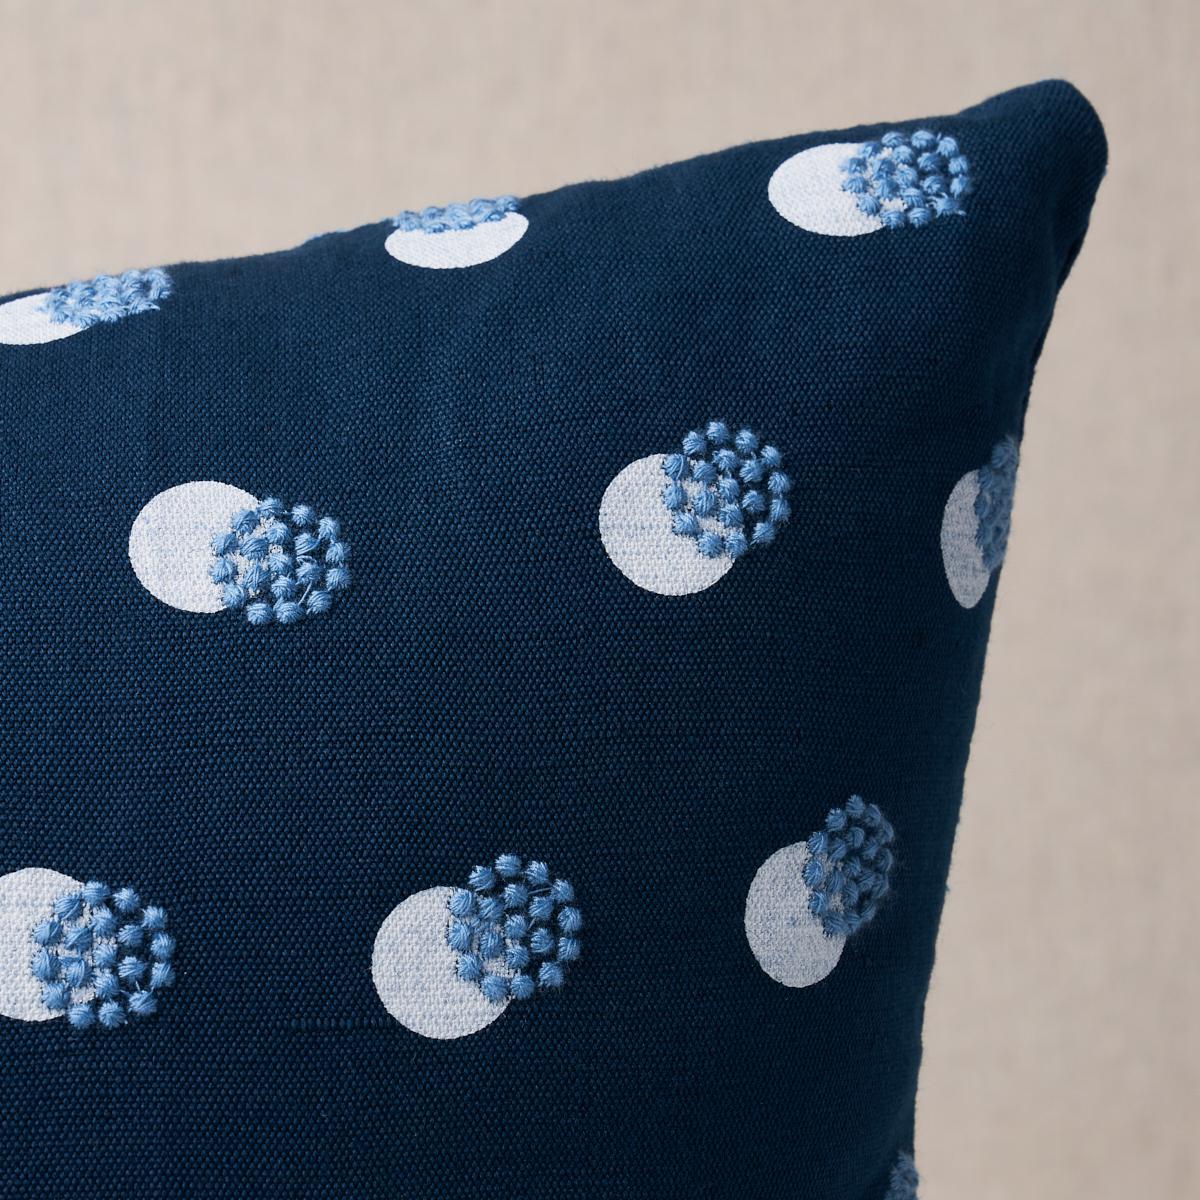 Taylor Embroidery Pillow_SKY ON NAVY